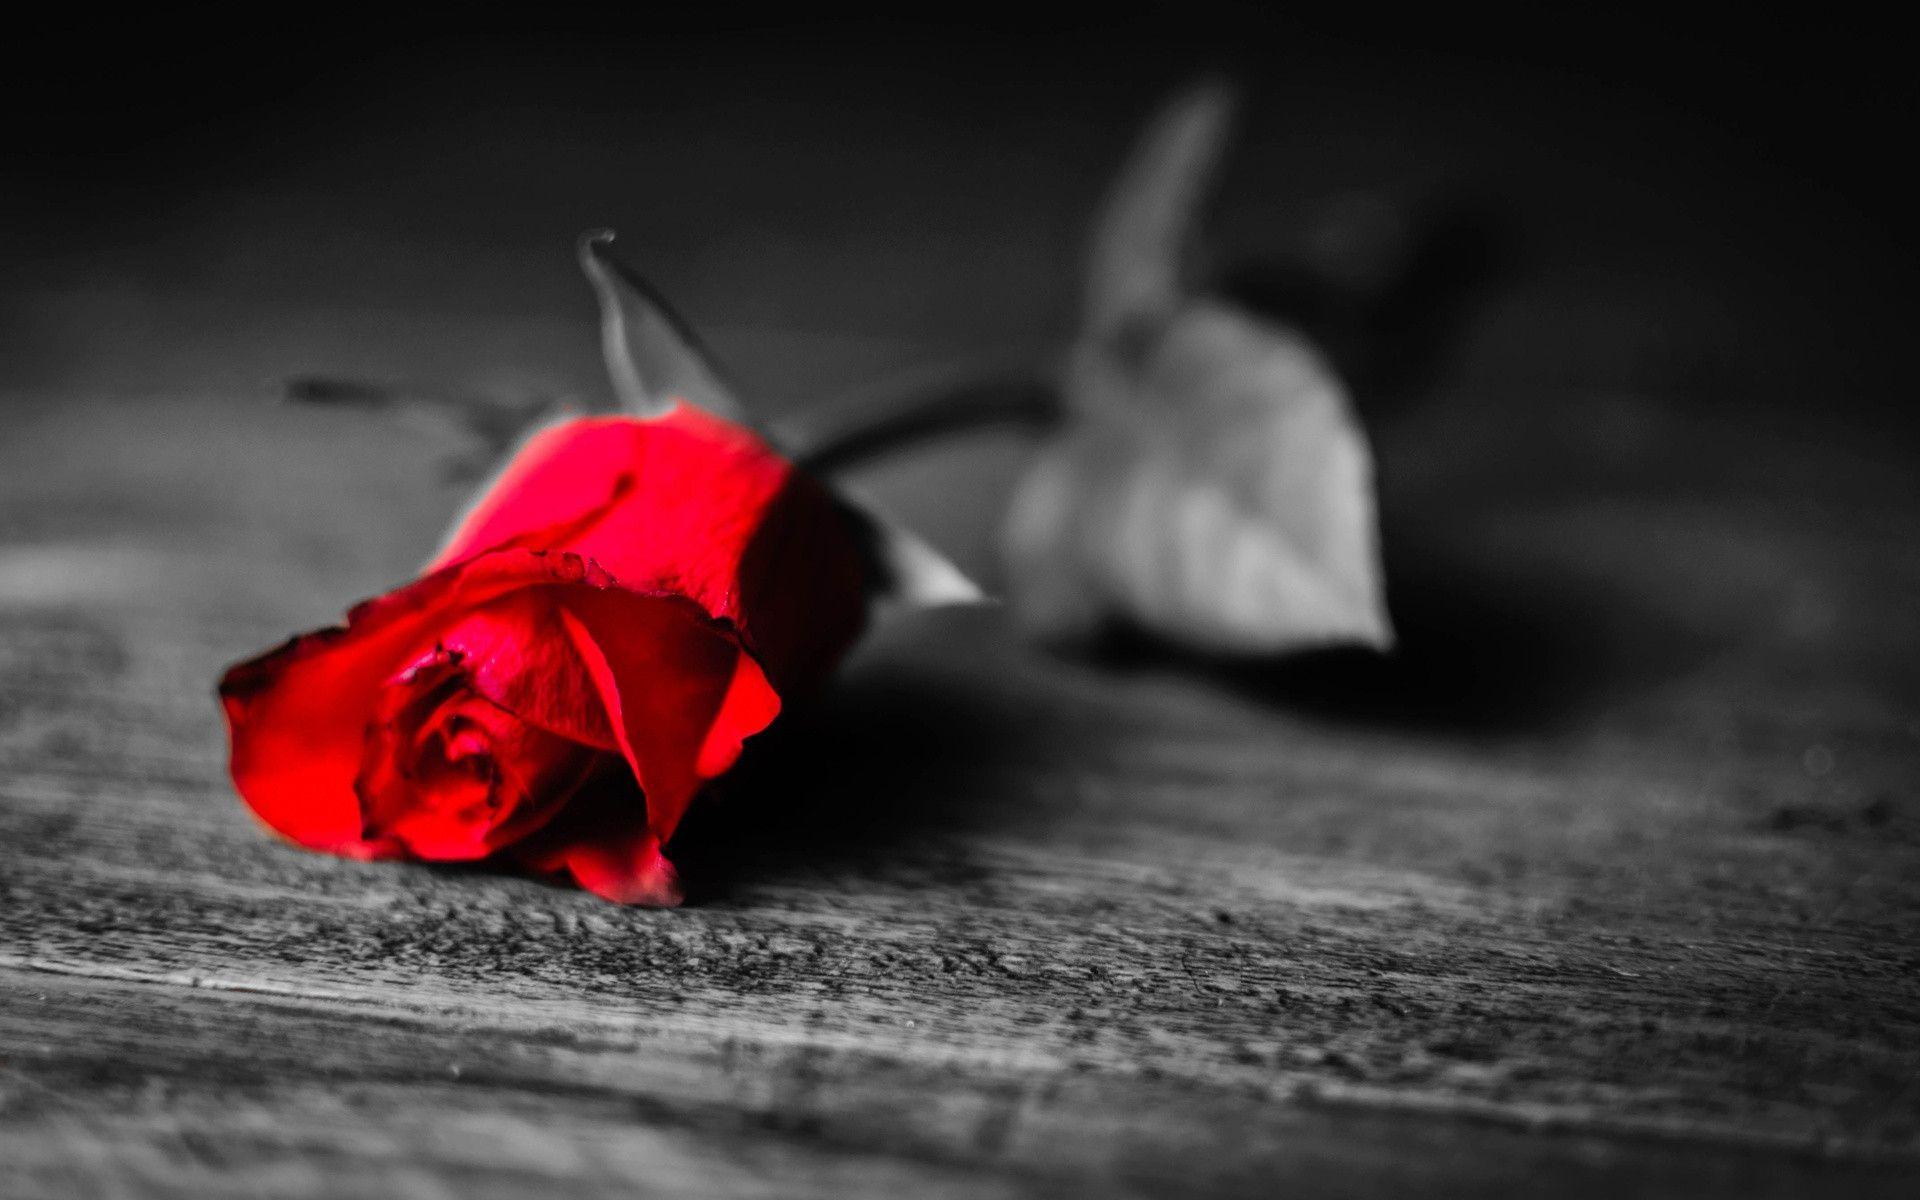 Wallpaper For > Red And Black Rose Wallpaper